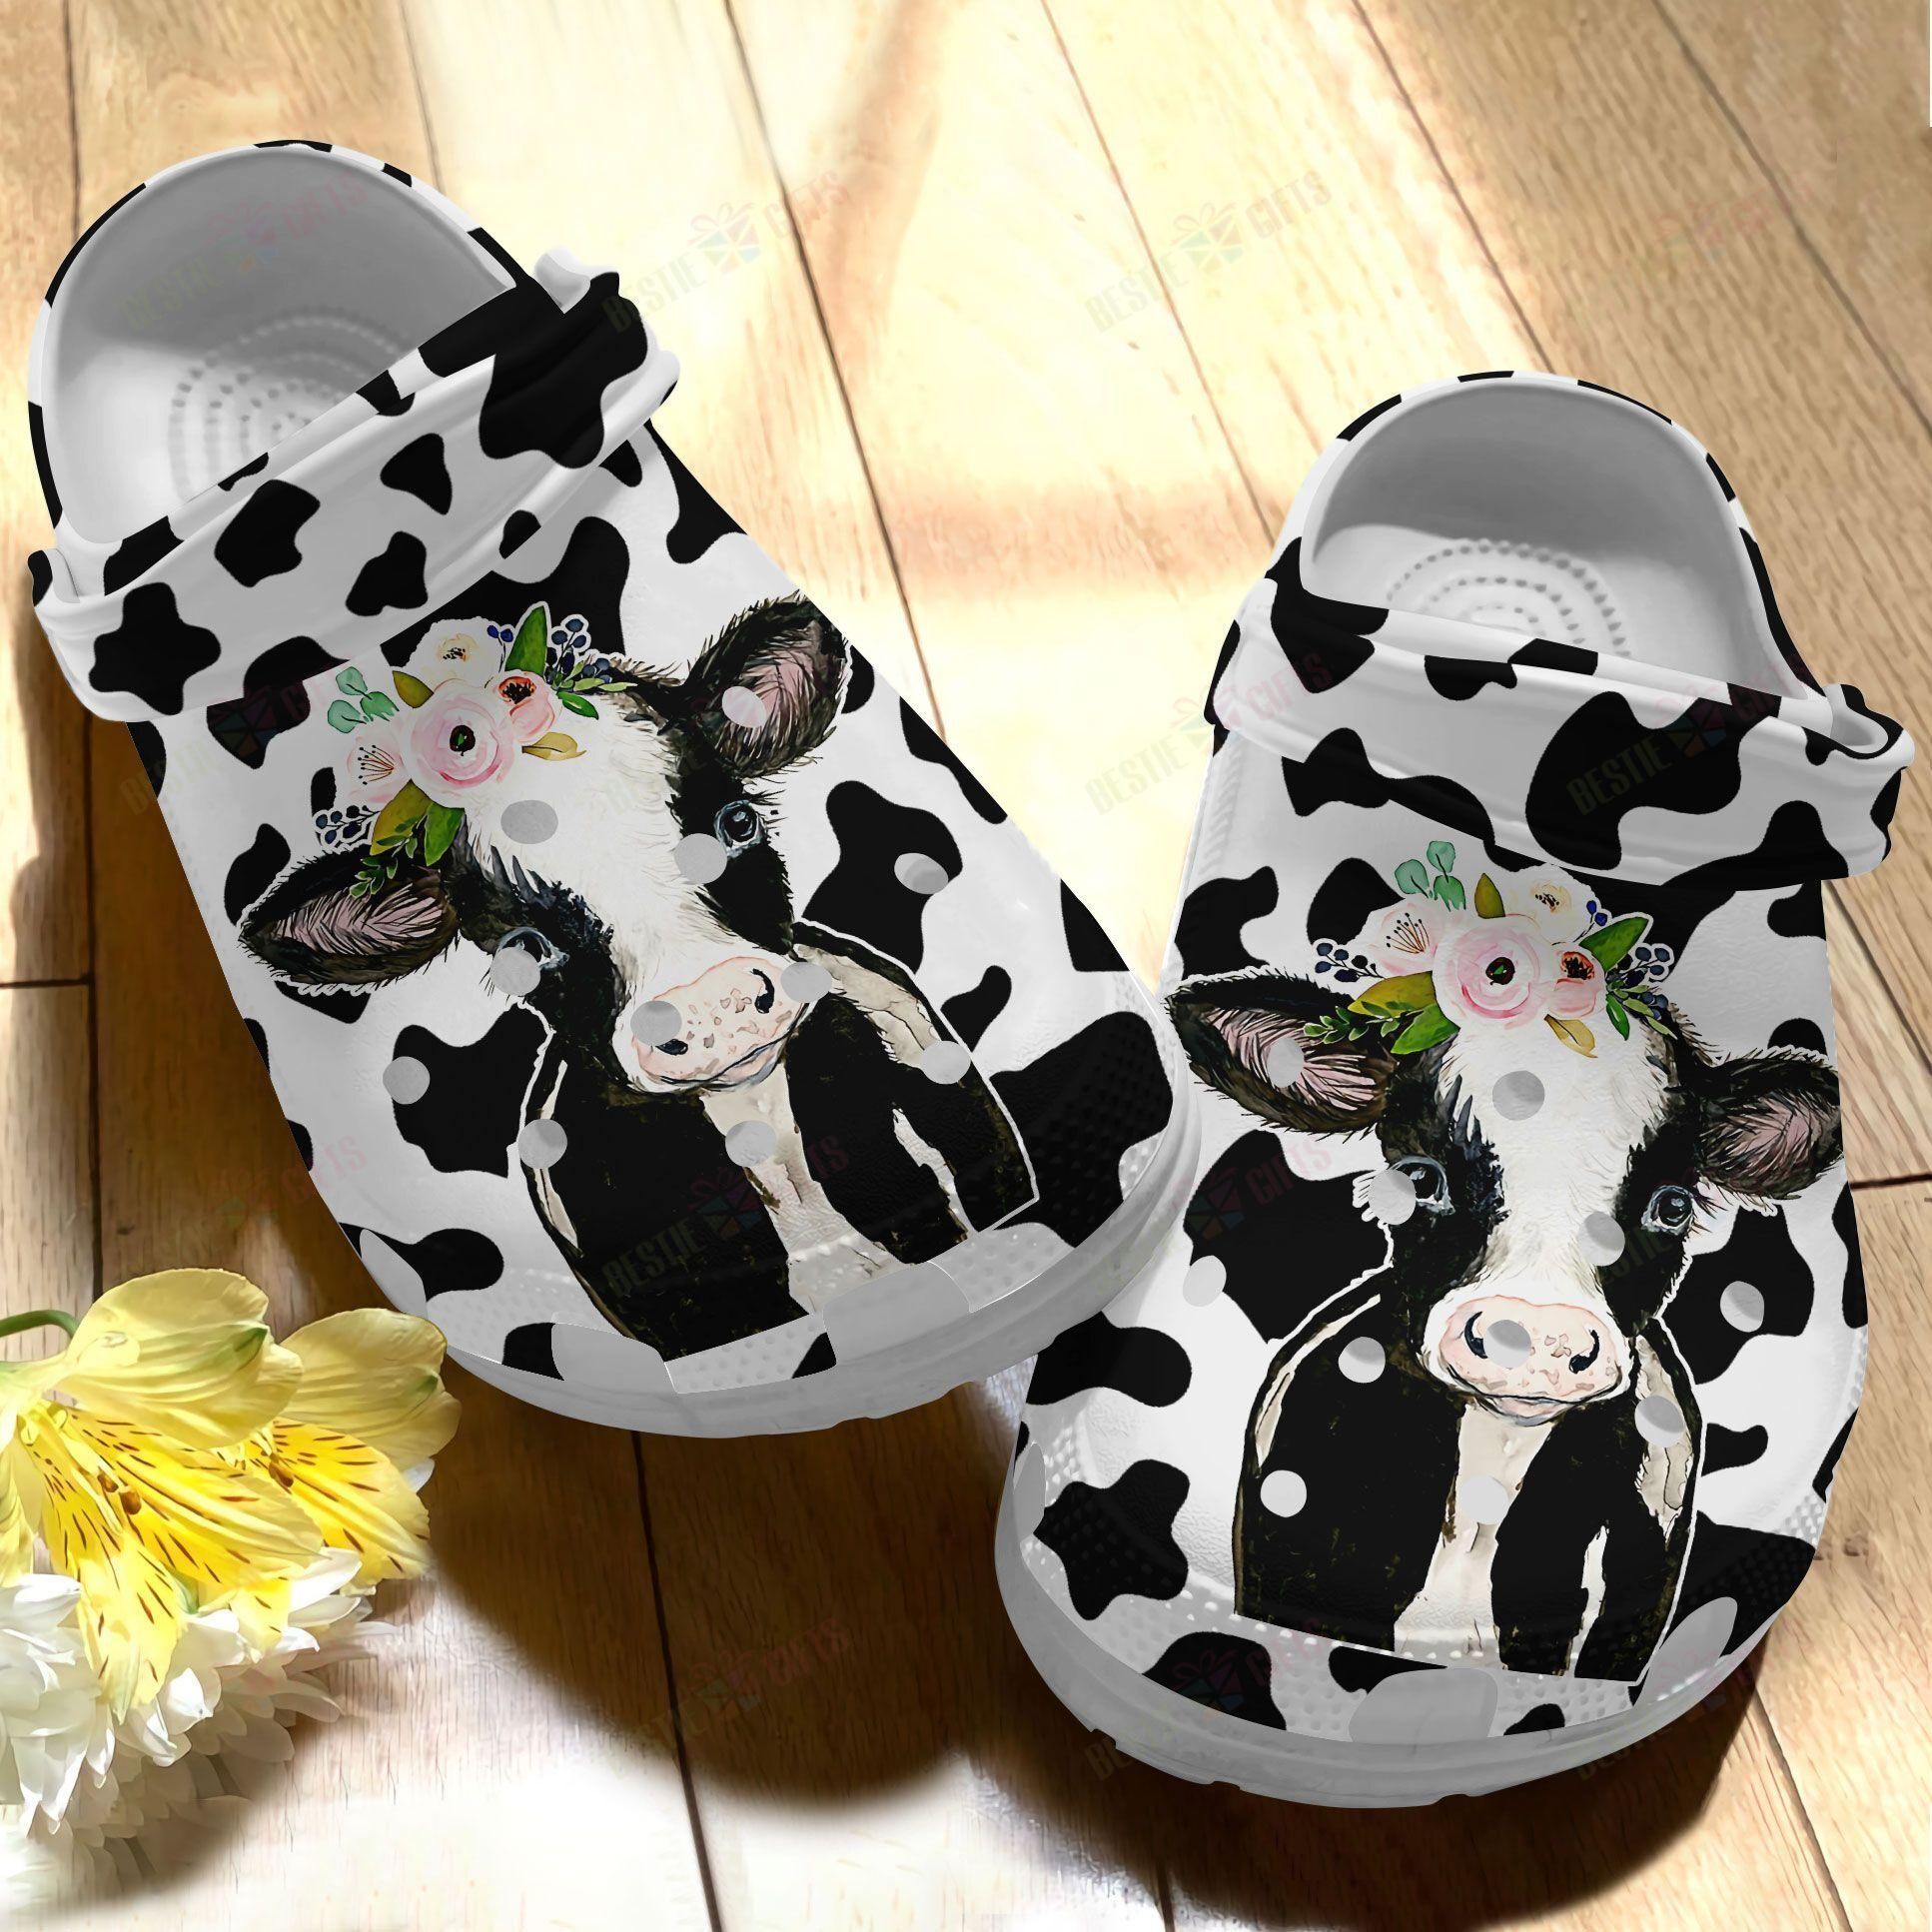 Cow Crocs Classic Clog Whitesole Baby Cow Skin Pattern Shoes ...